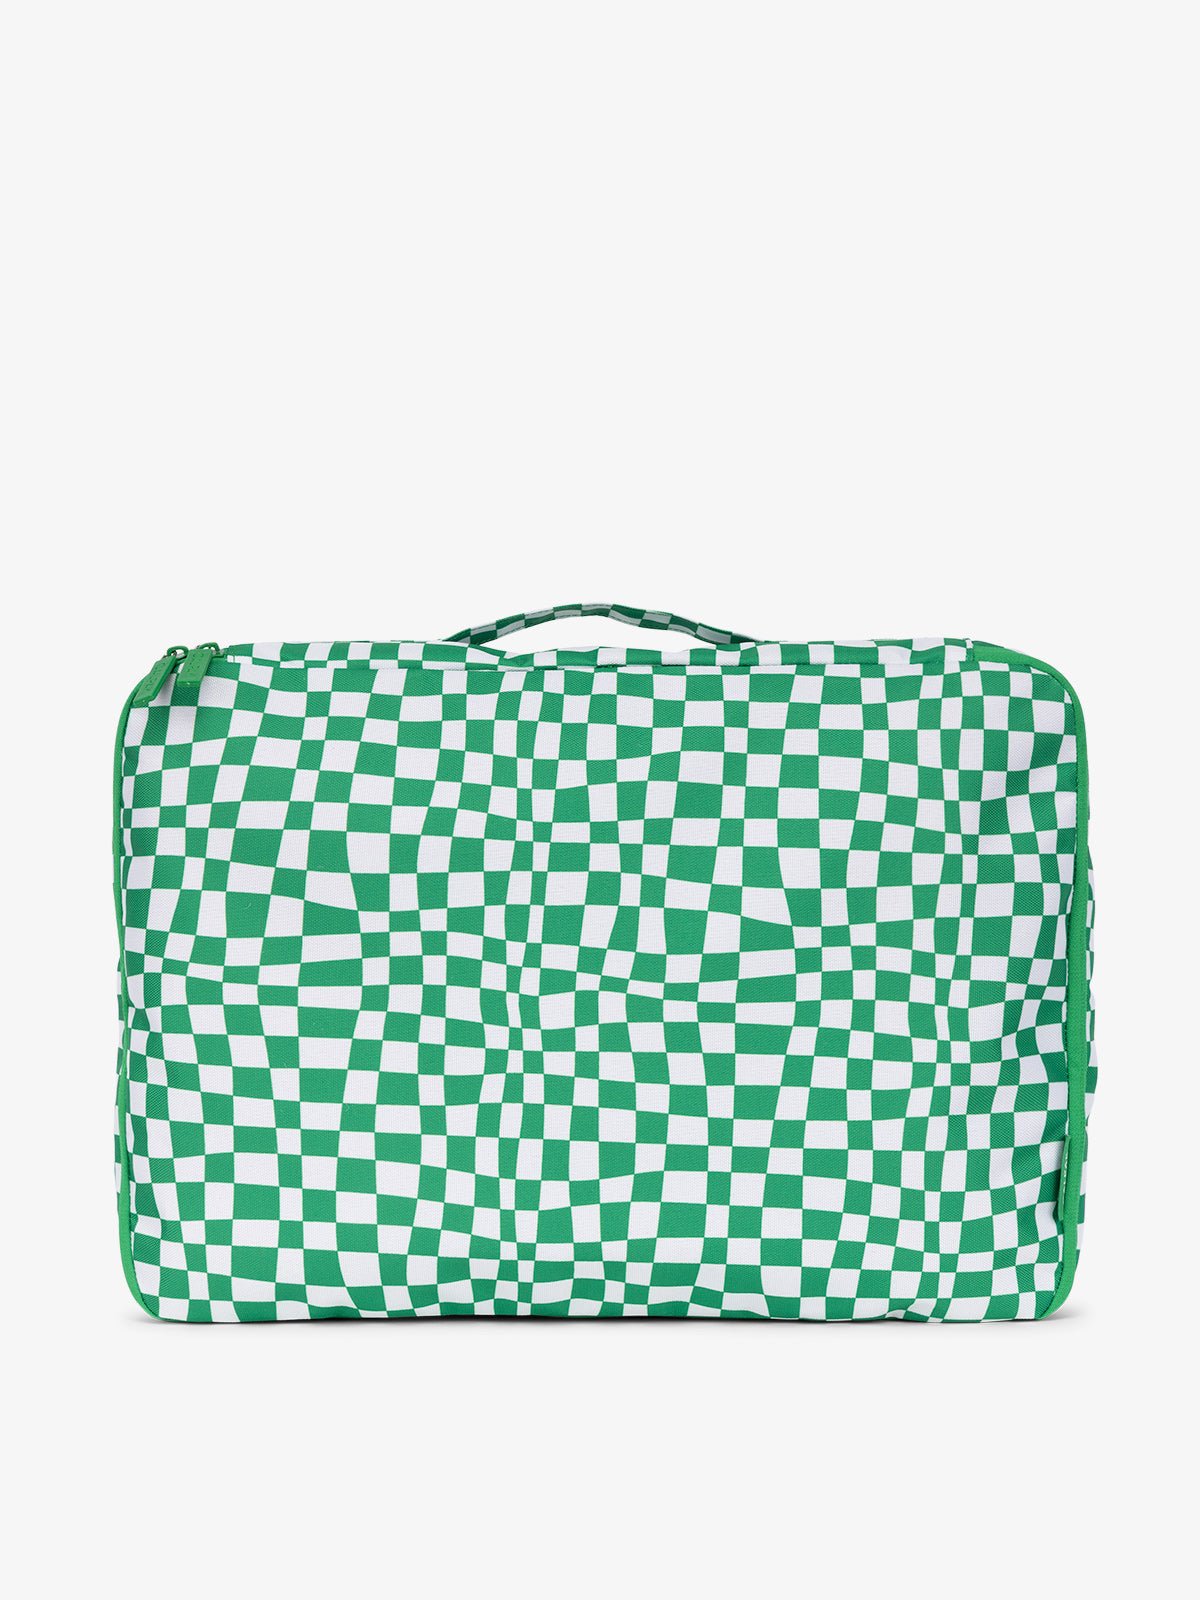 CALPAK large packing cubes with top handle in green checkerboard